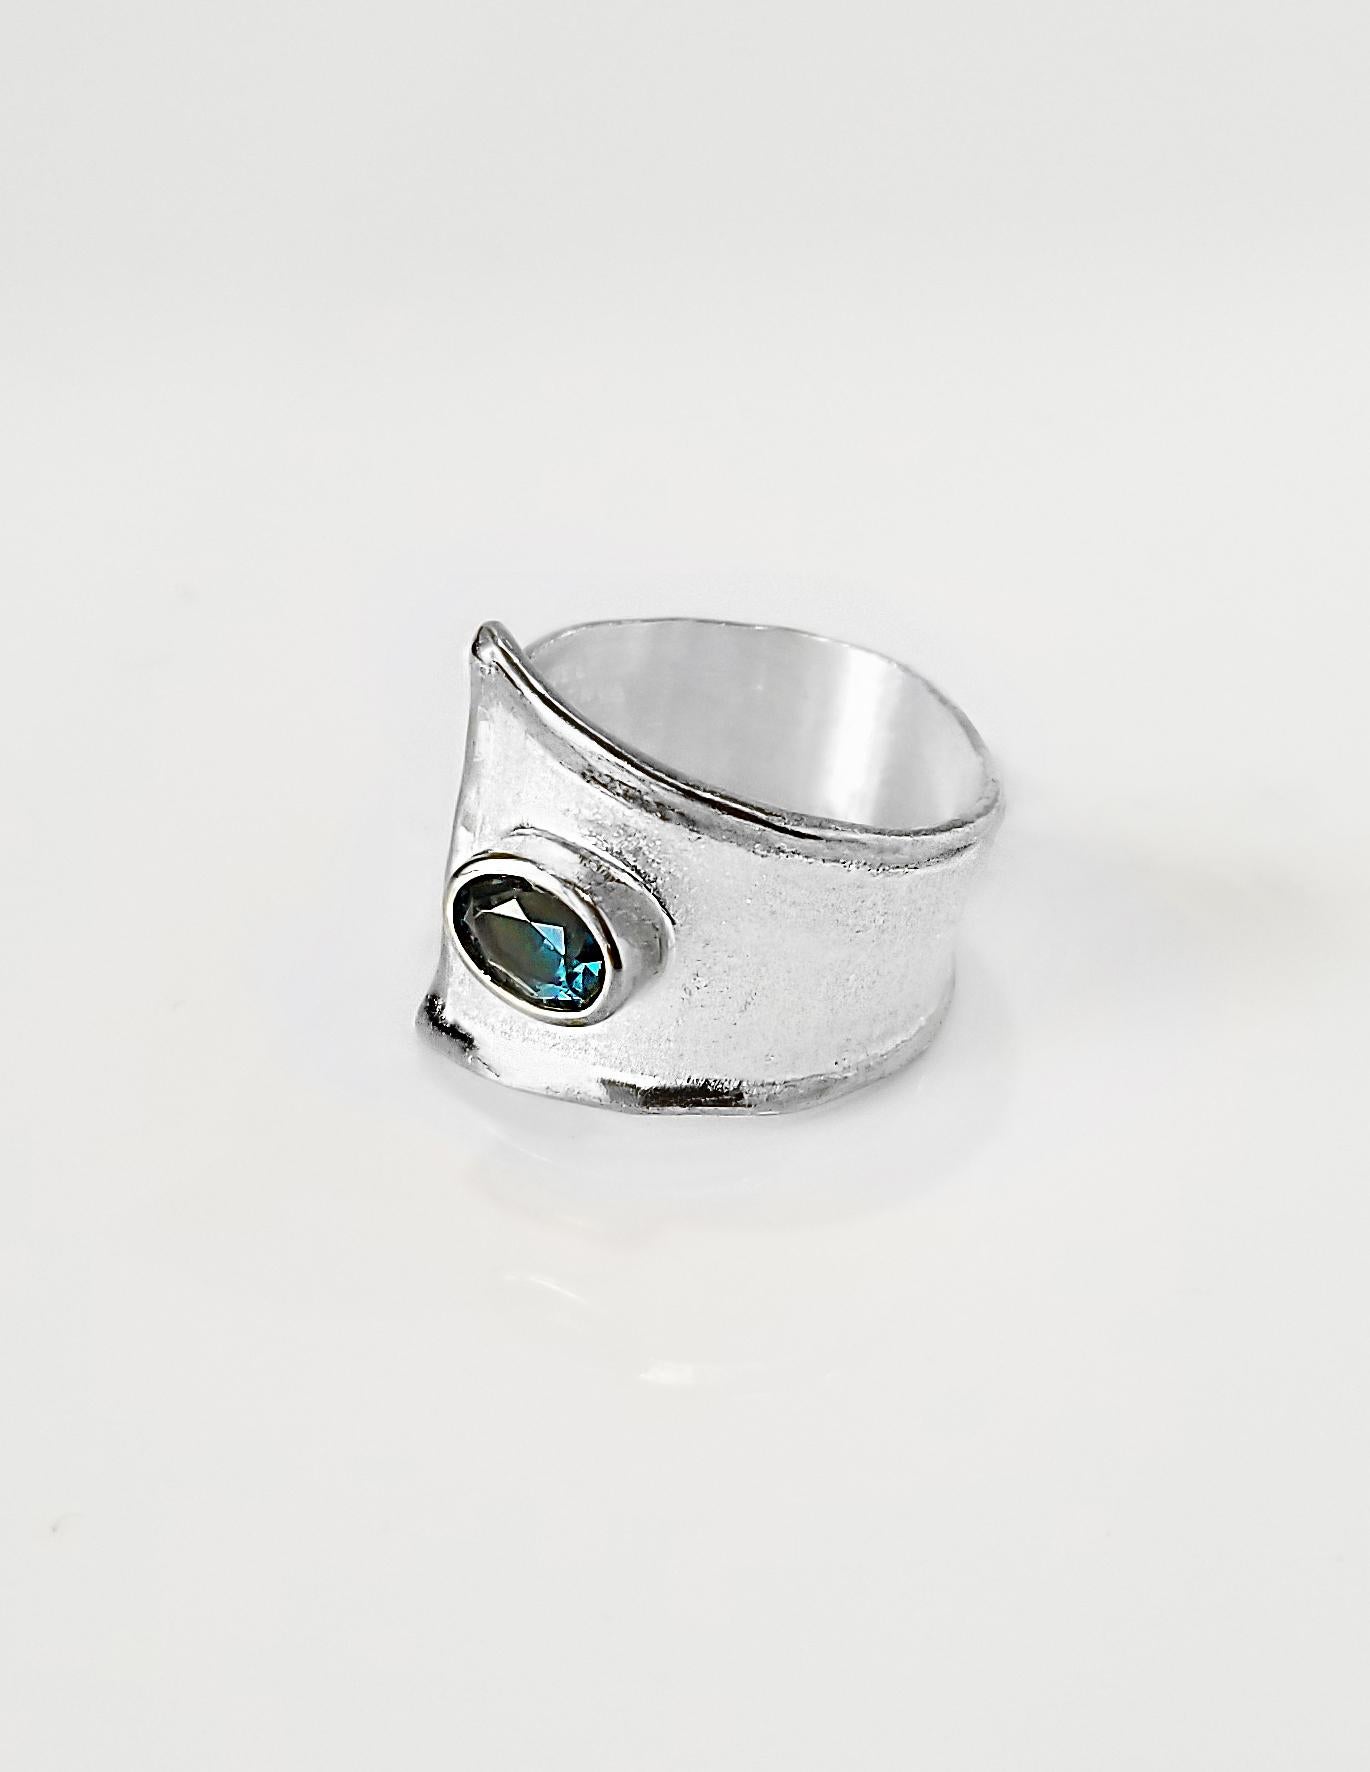 Oval Cut Yianni Creations London Blue Topaz Fine Silver and Palladium Adjustable Ring For Sale